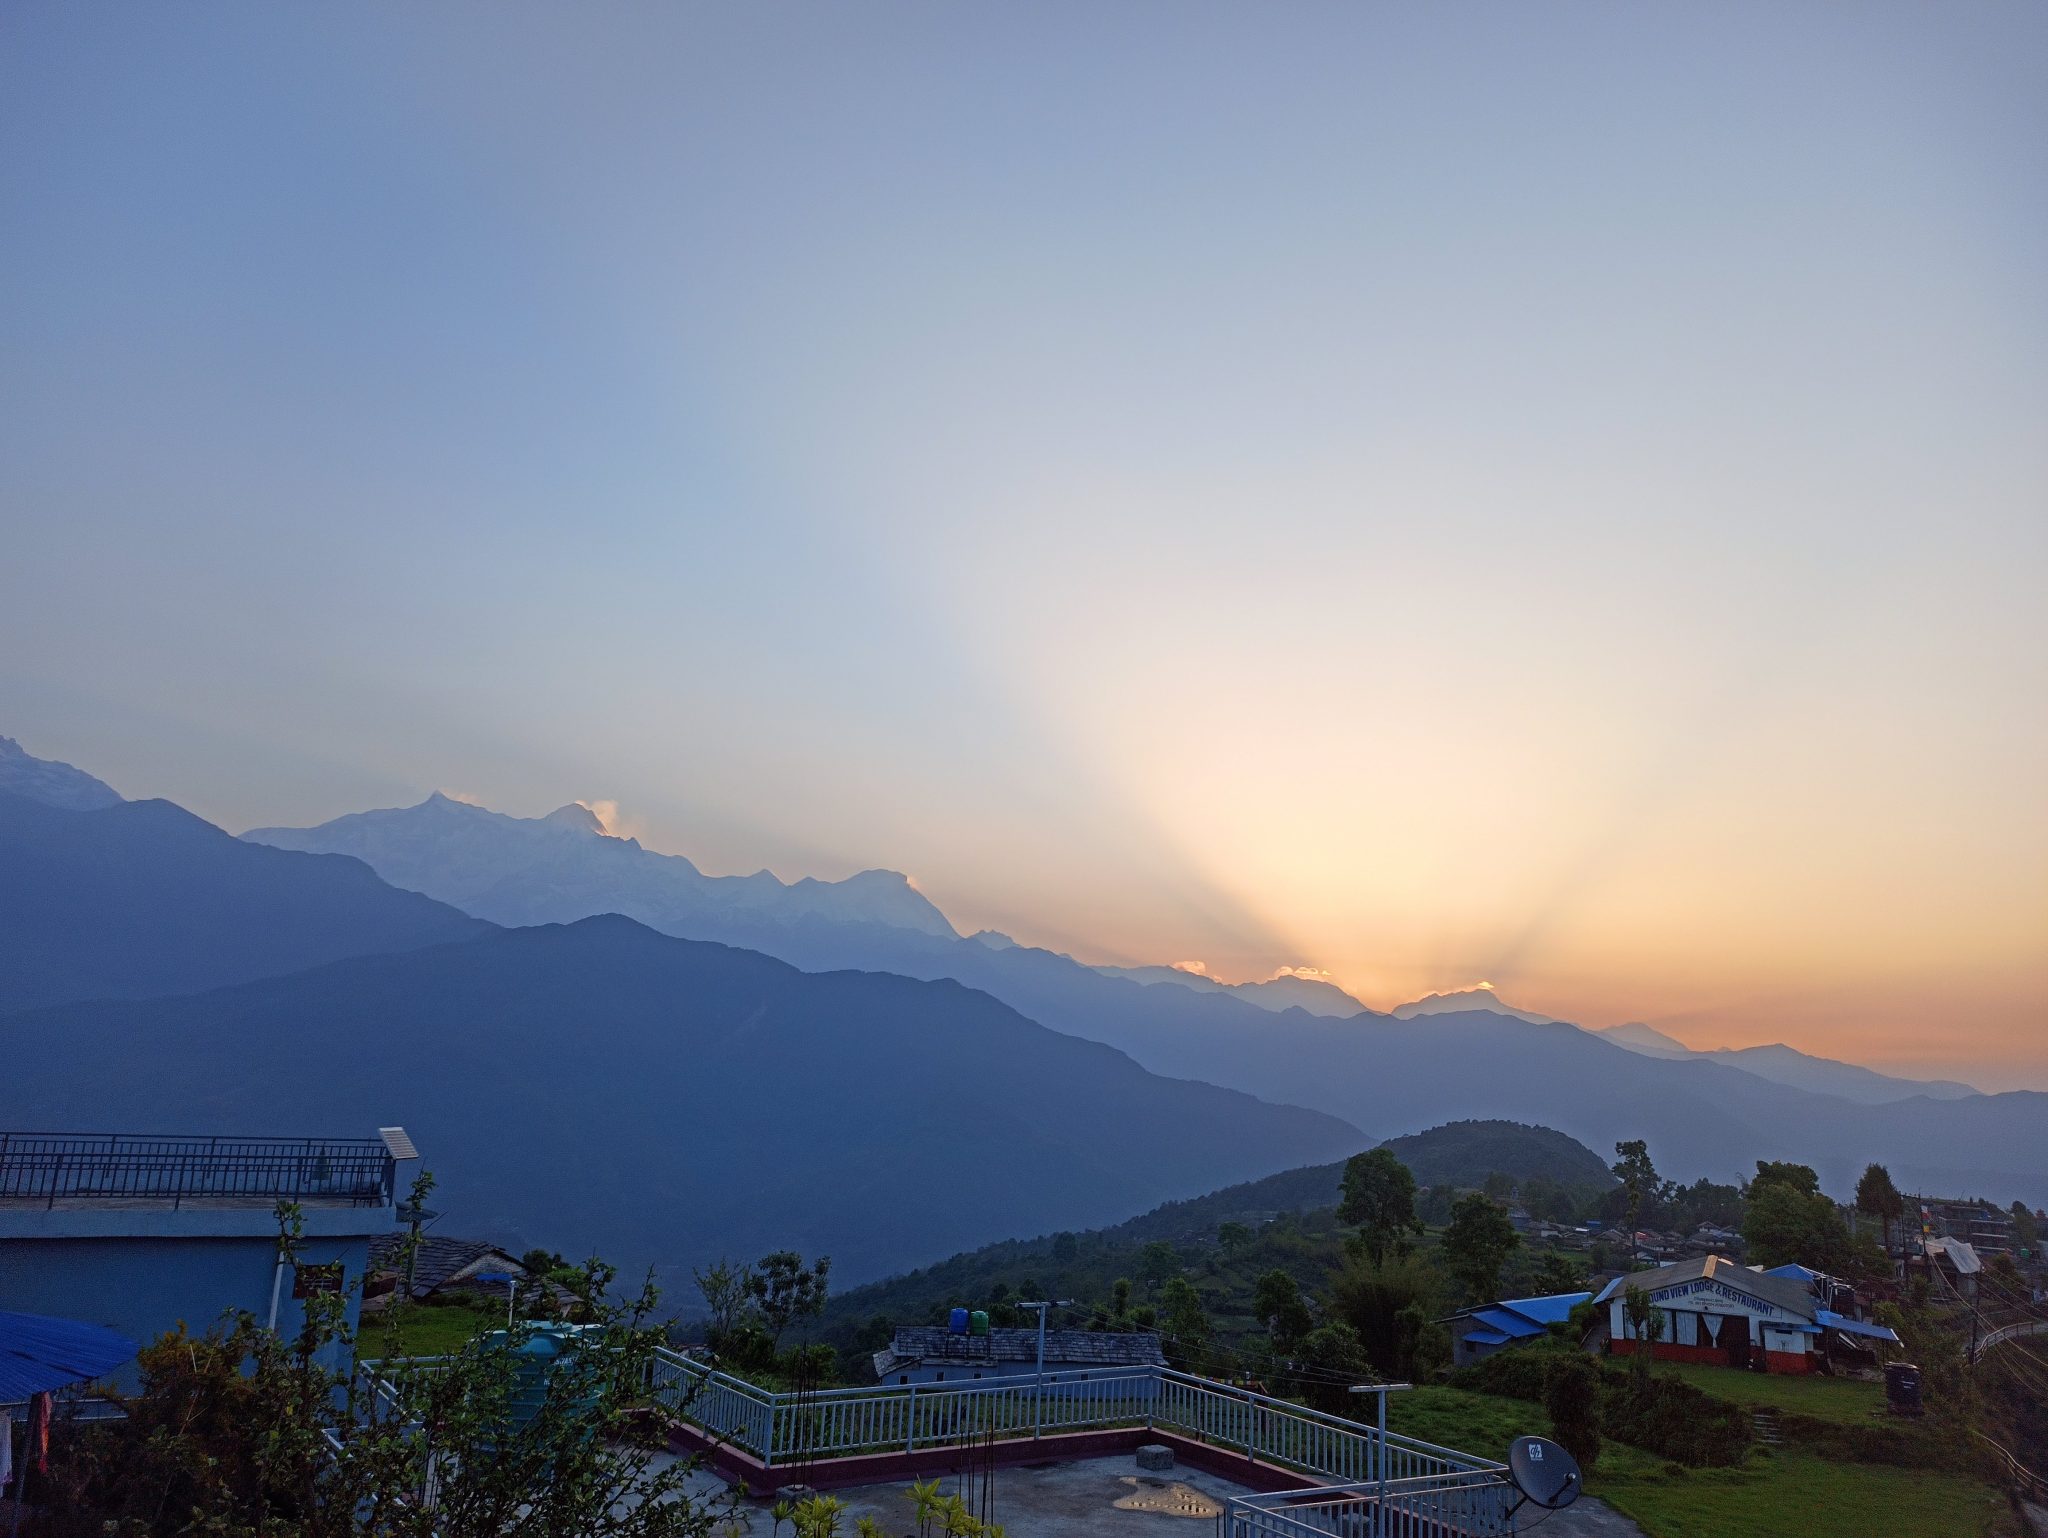 Mountain range view, at the time of sunrise. Seen From Dhampus, Nepal.